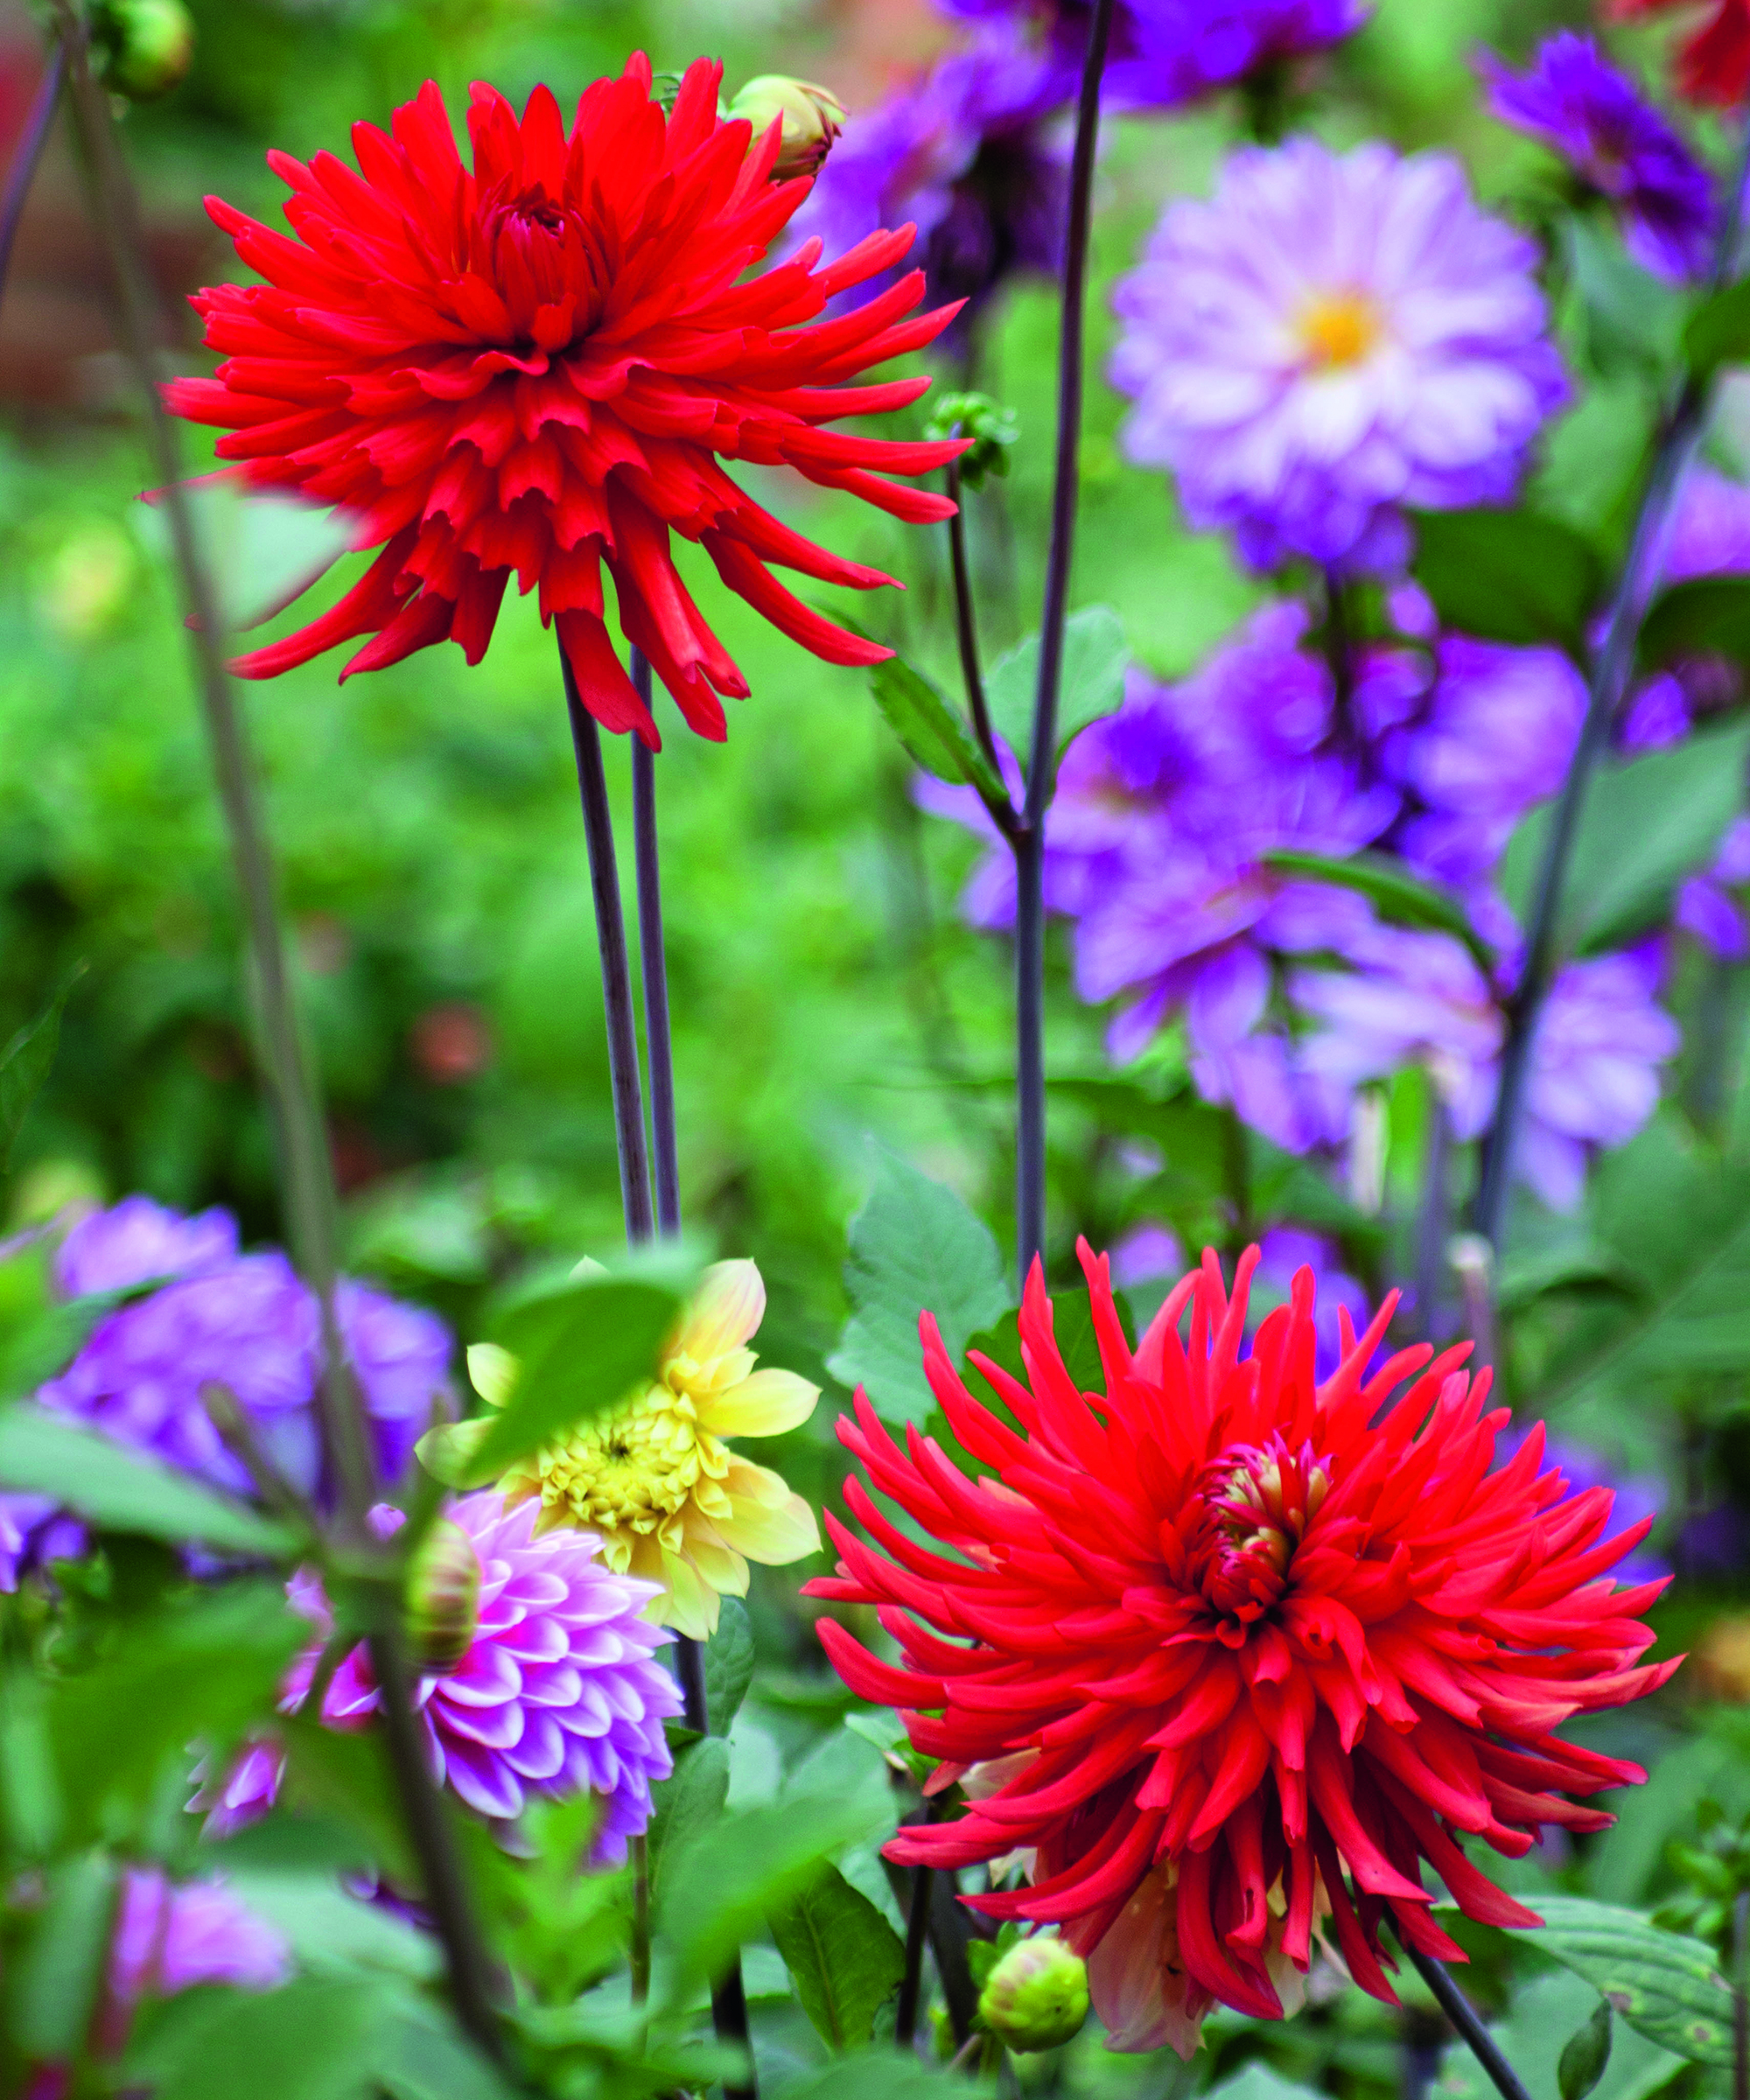 Bright red dahlias set against soft purple and yellow varieties